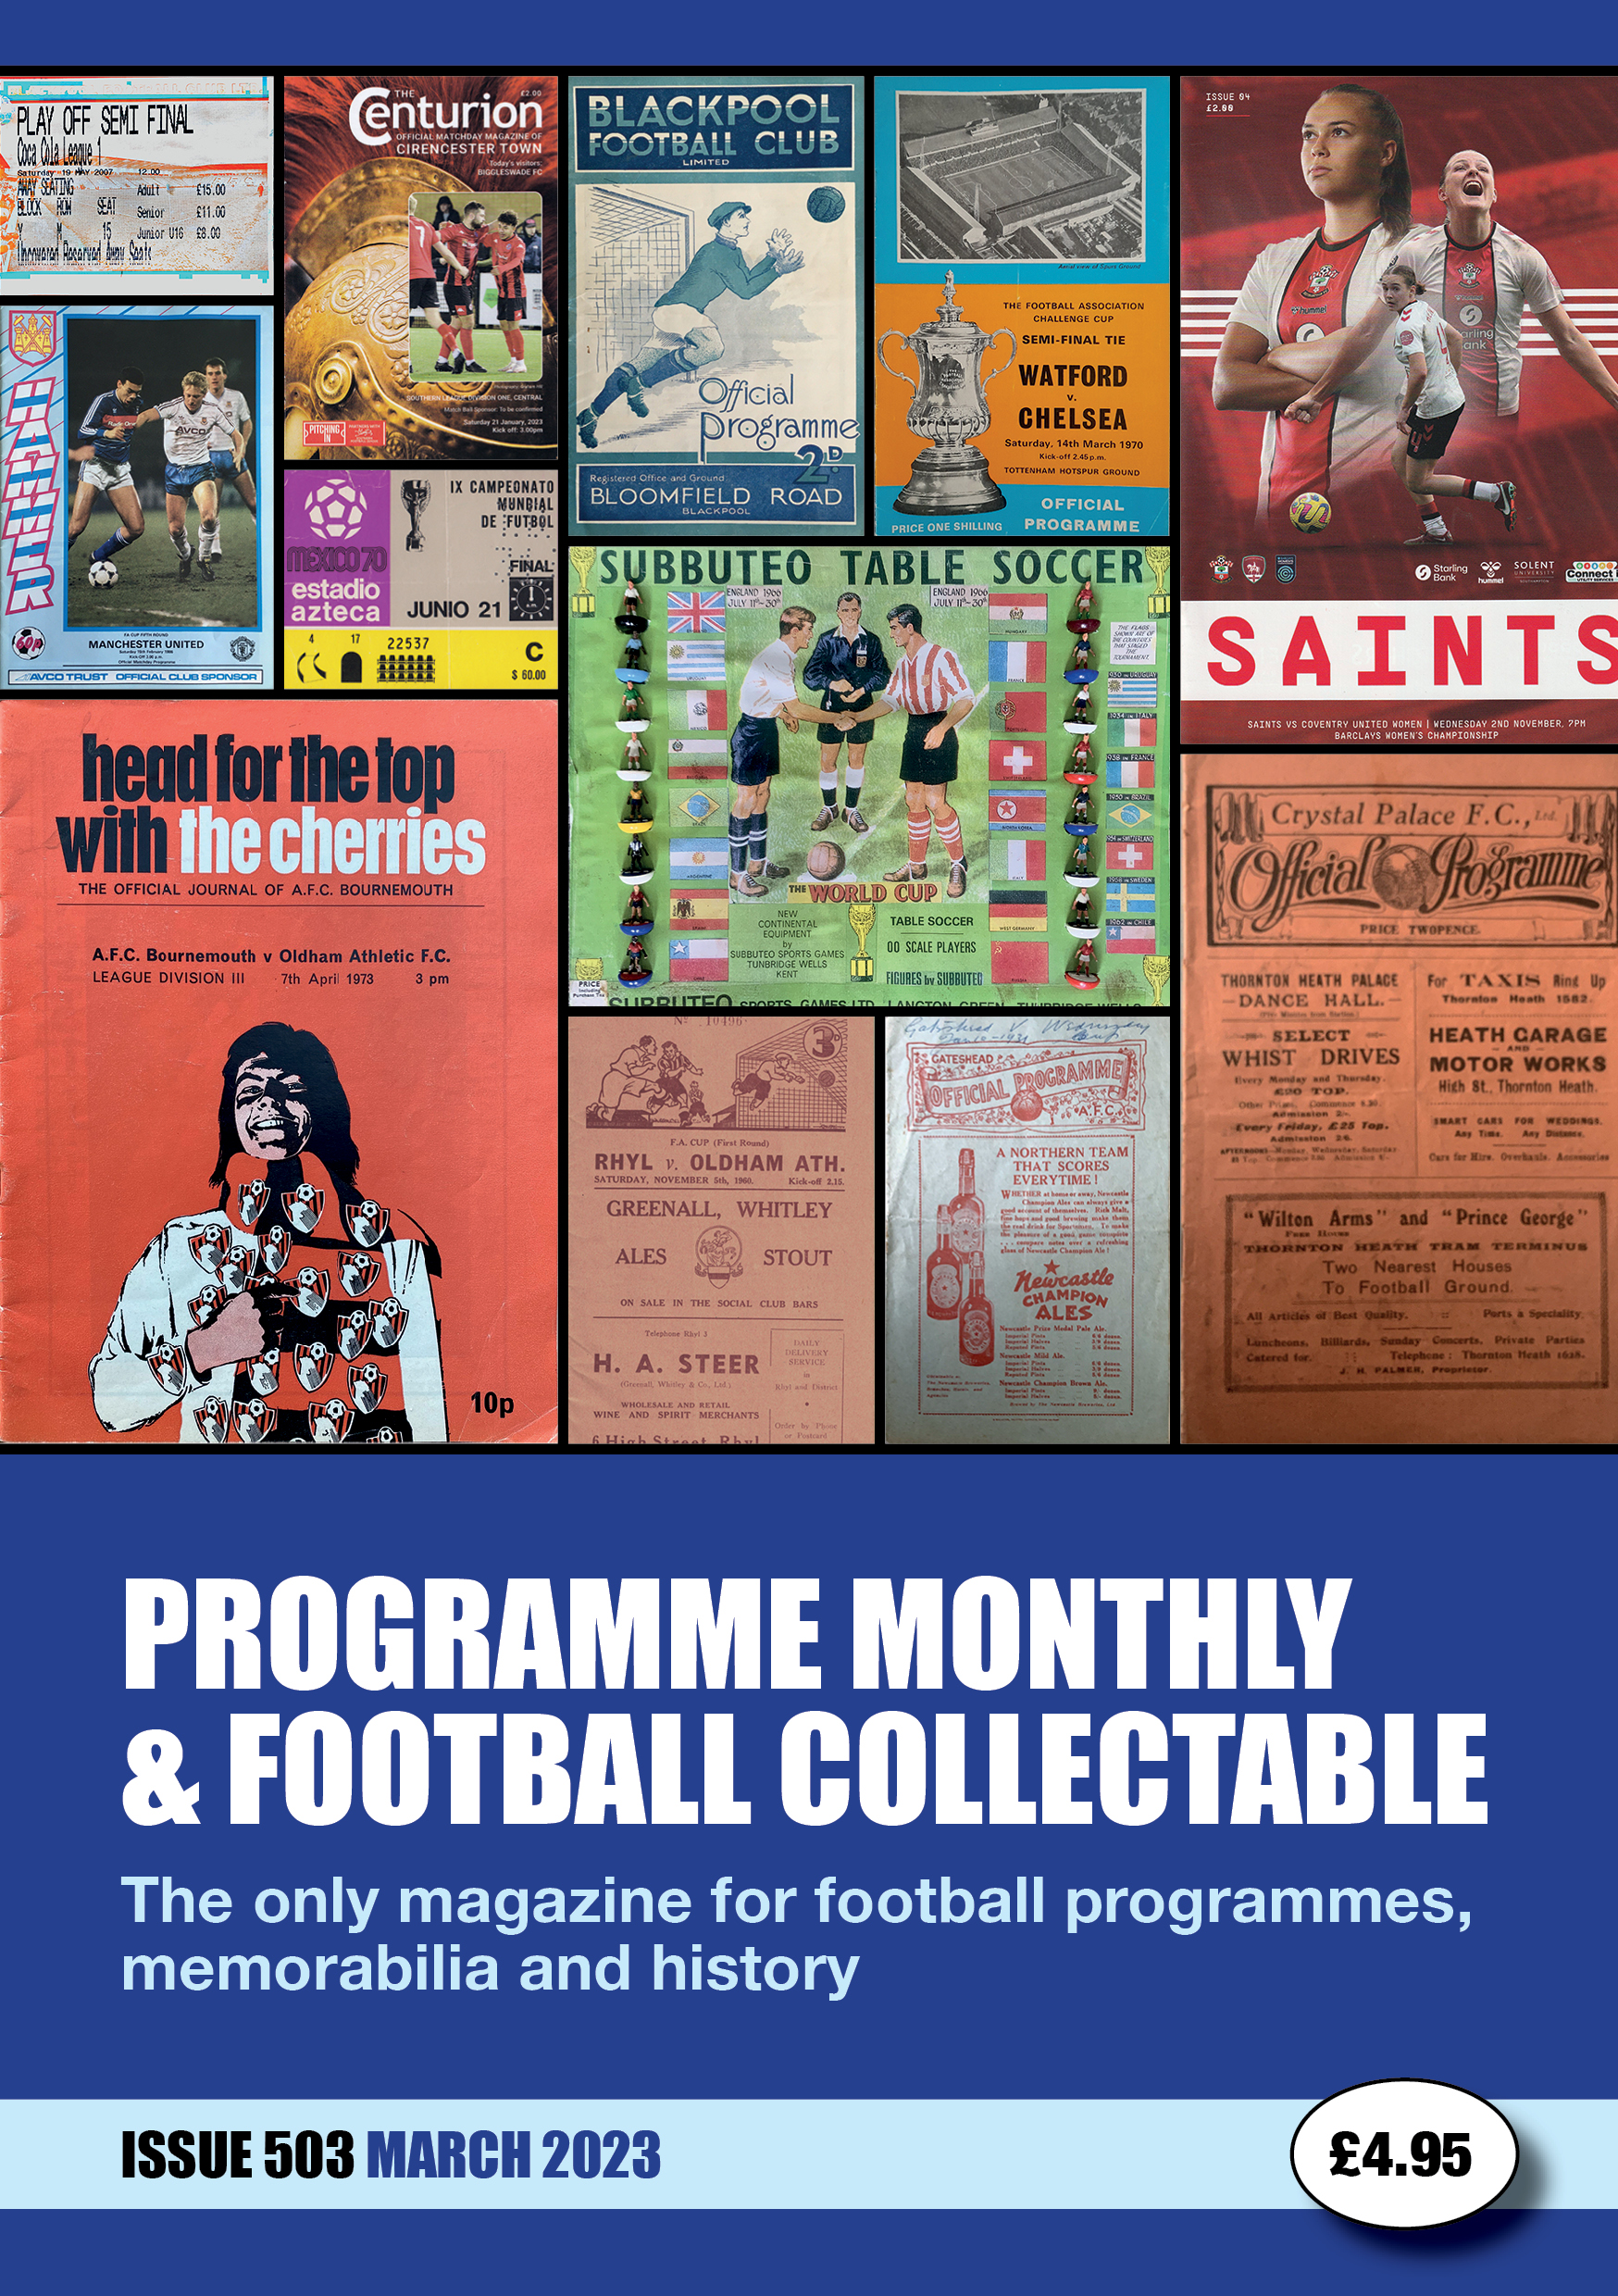 Programme Monthly - Issue 503 March 2023